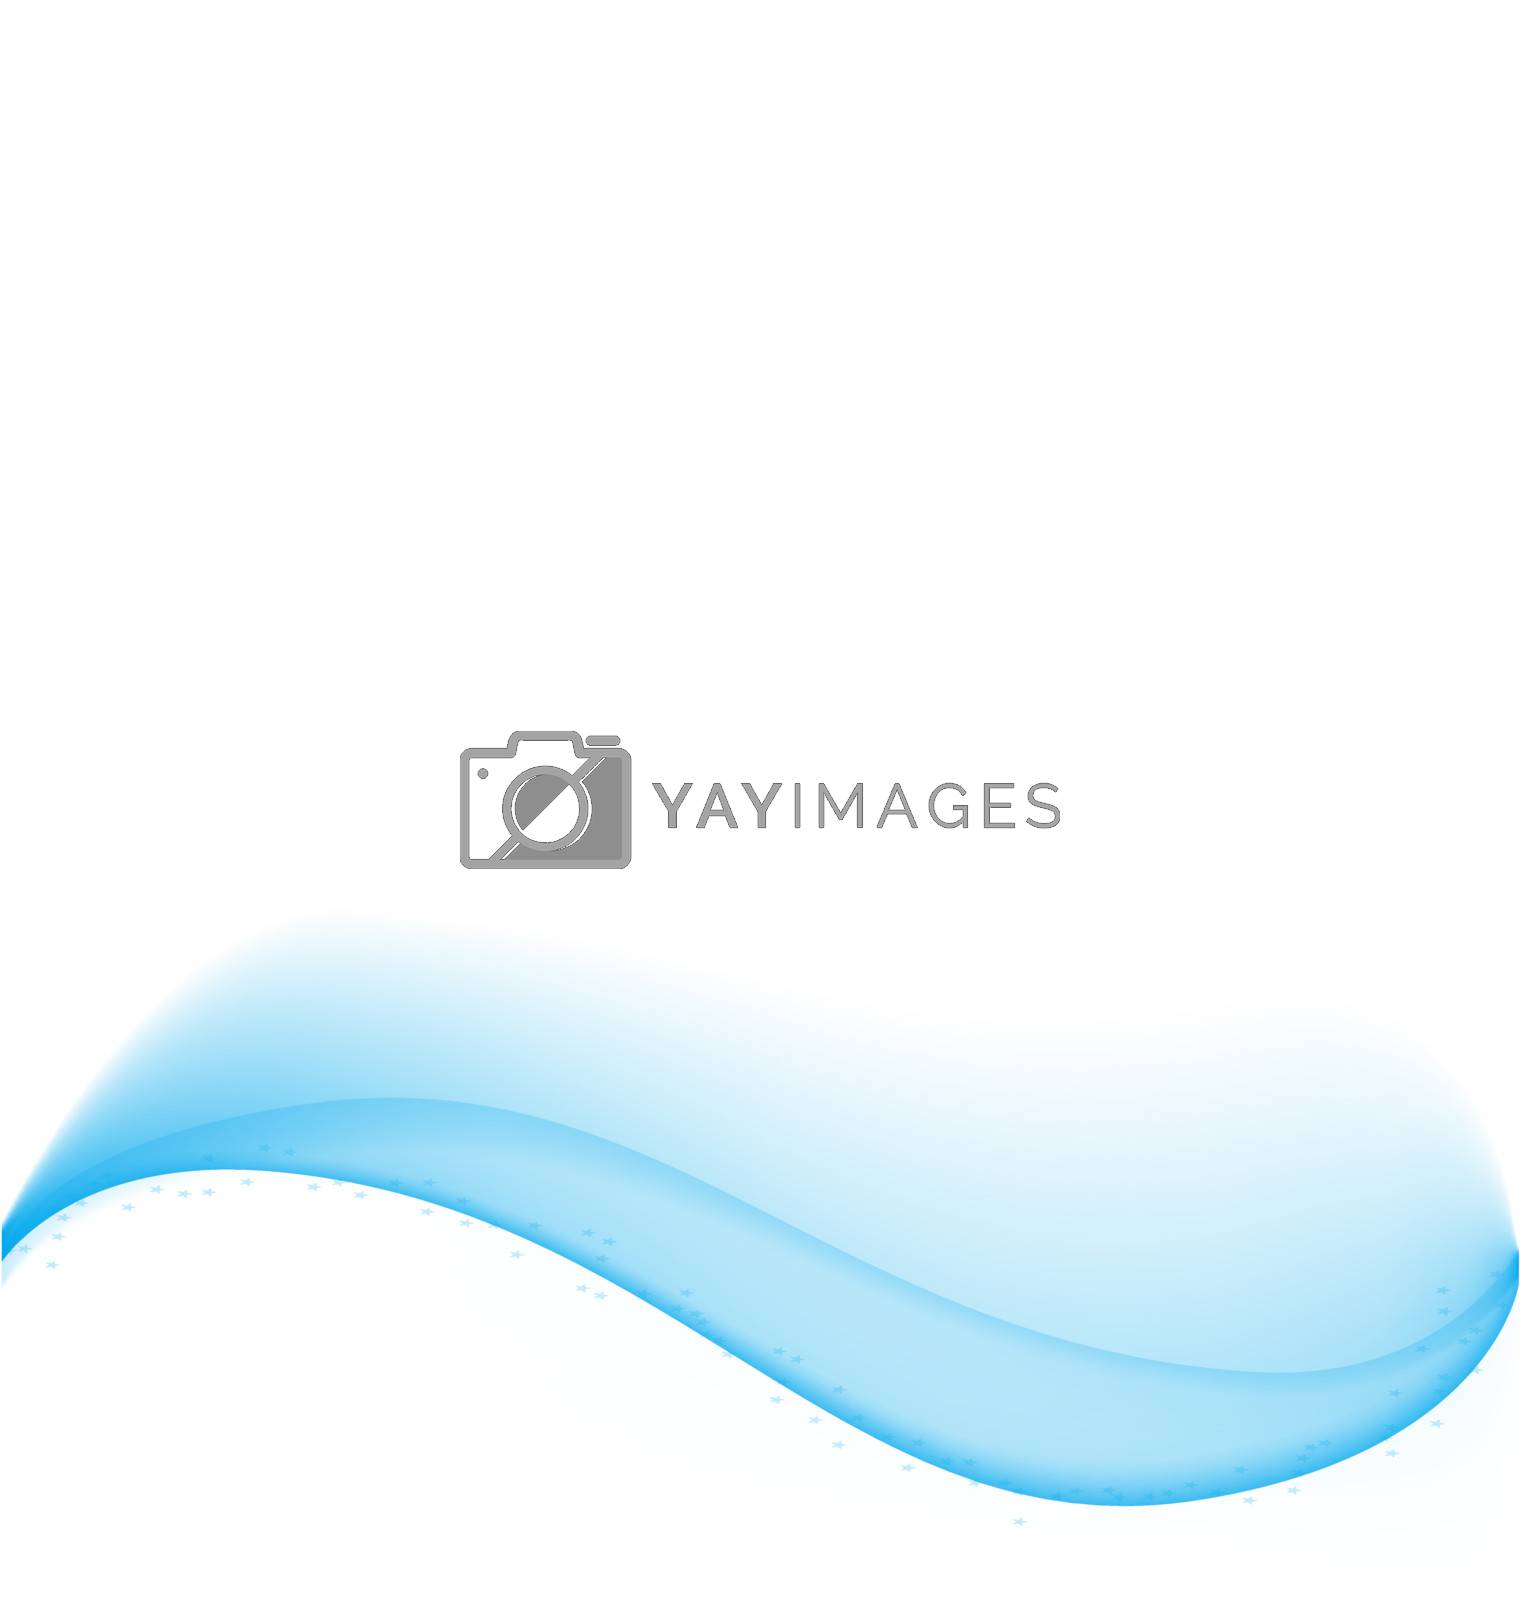 Royalty free image of Abstract blue wave by Arsen